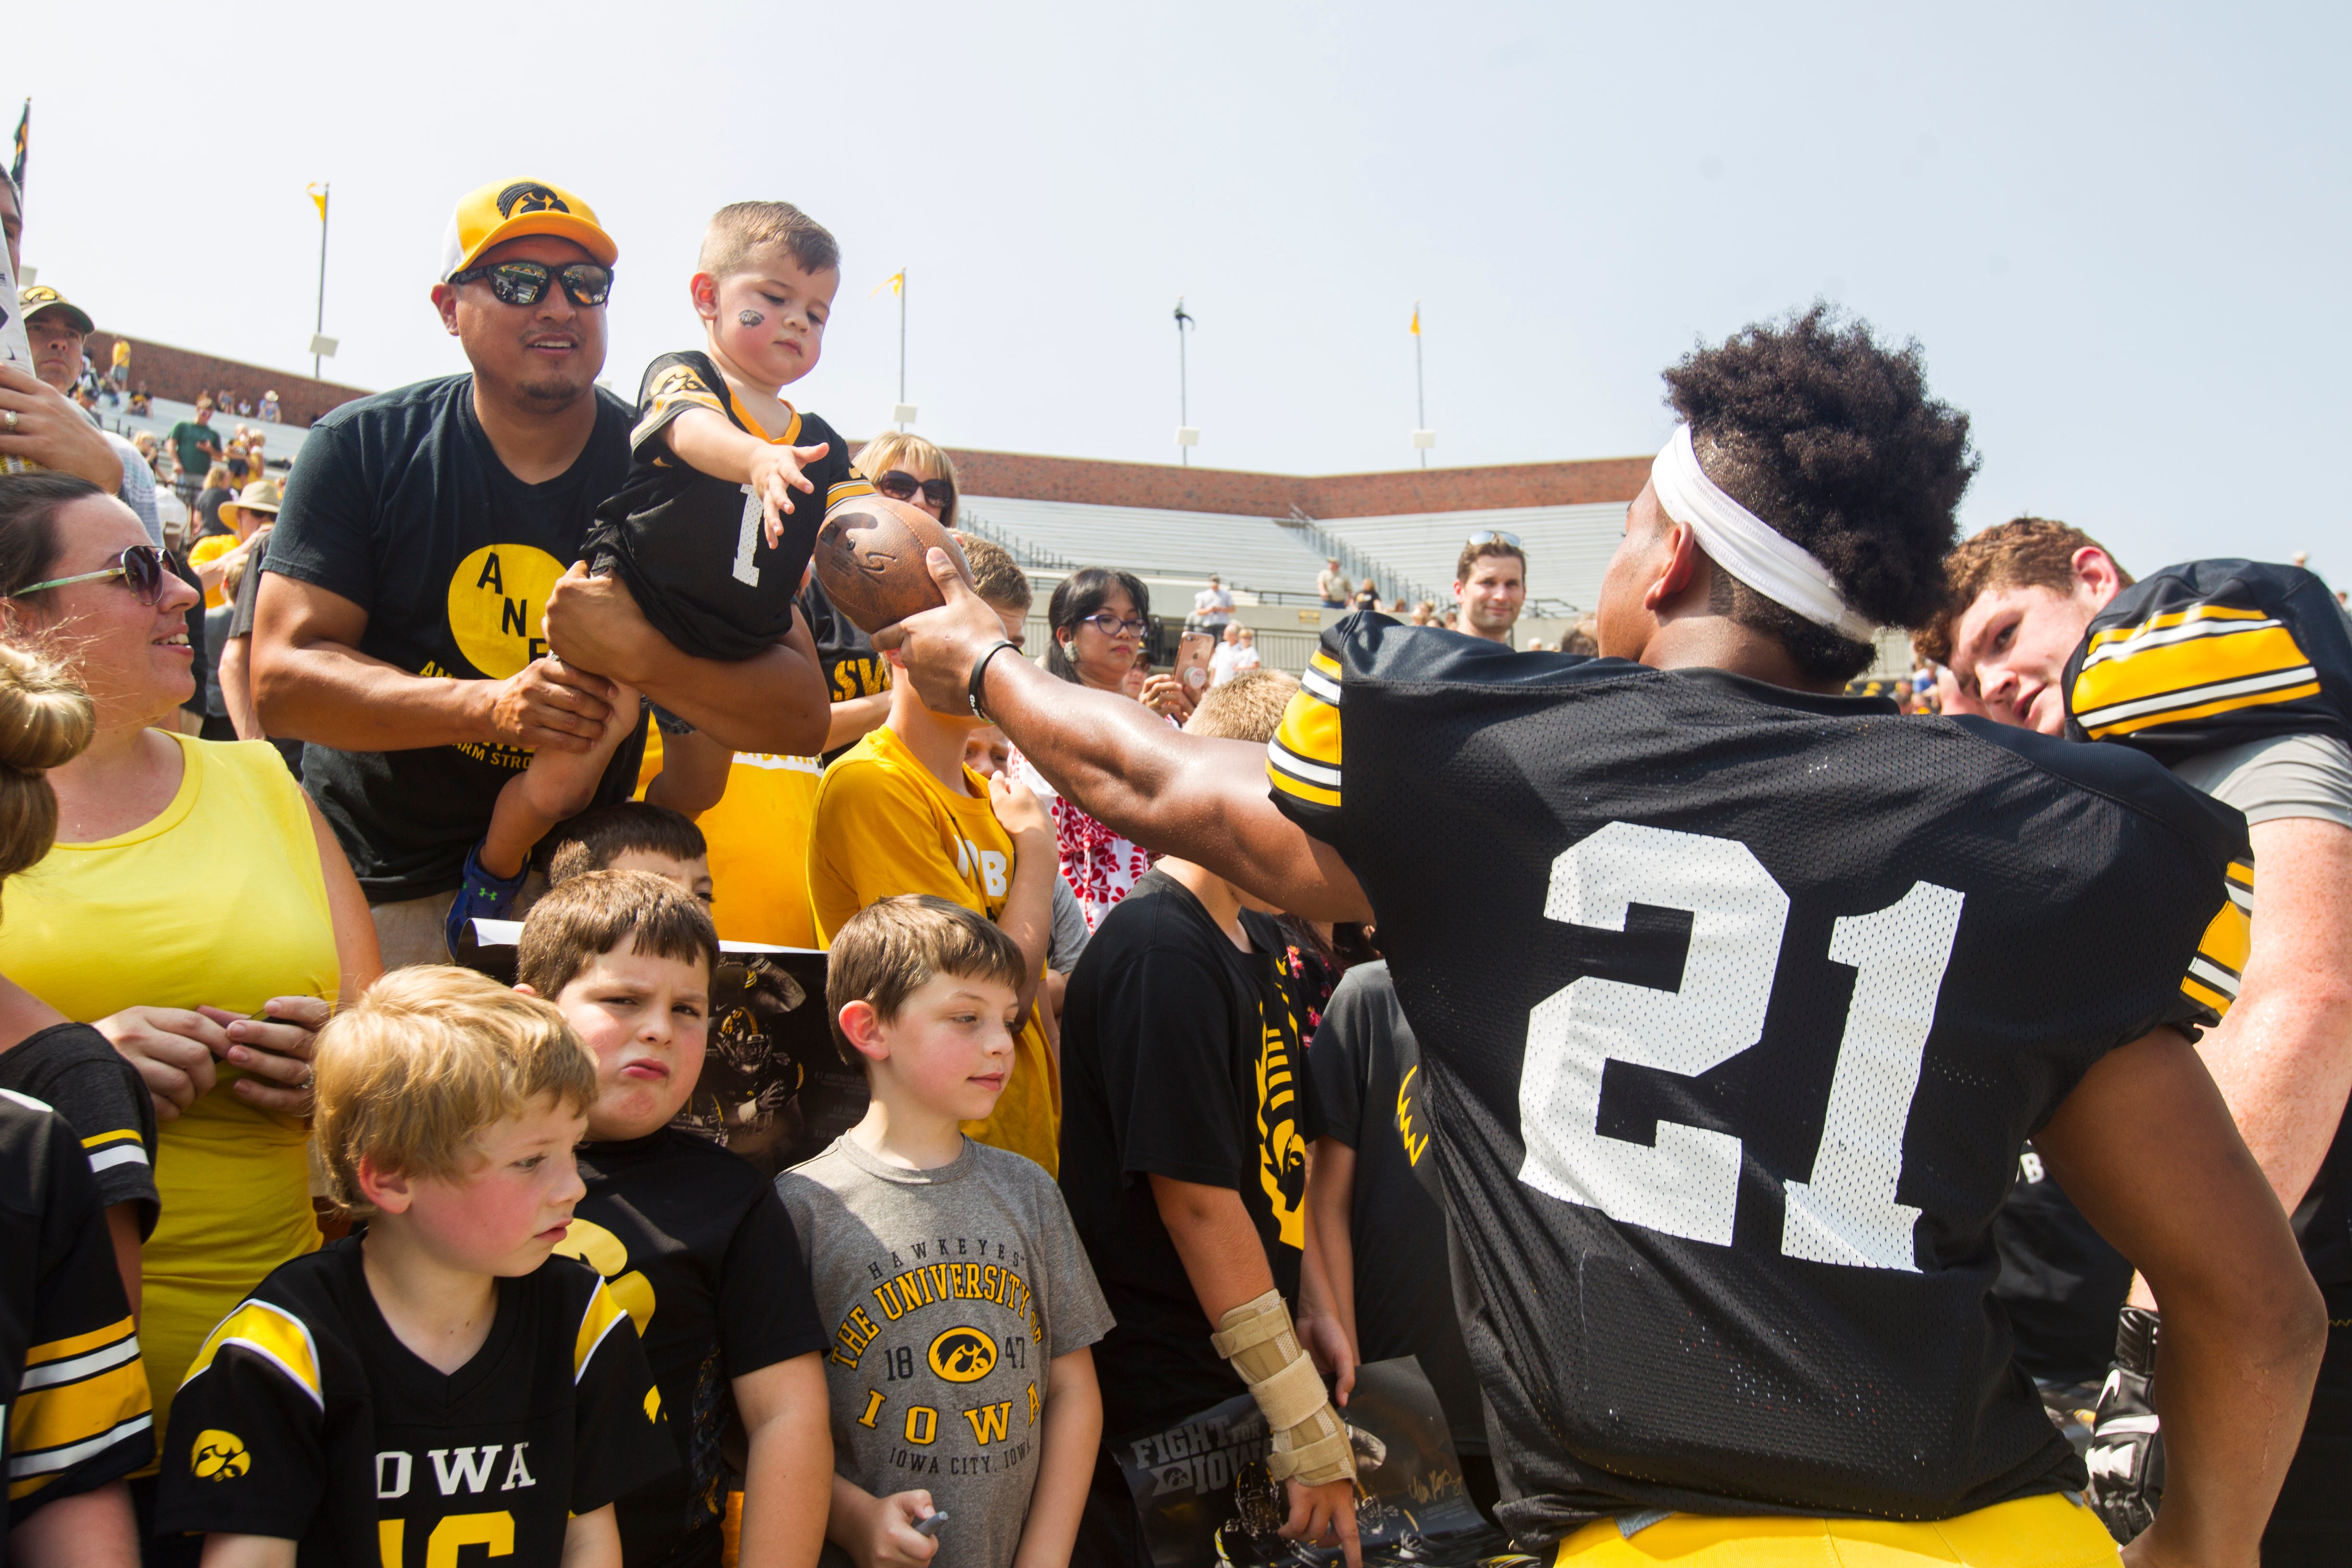 Iowa running back Ivory Kelly-Martin hands a signed football to a young fan during a Kids Day practice on Saturday, Aug. 11, 2018, at Kinnick Stadium in Iowa City.